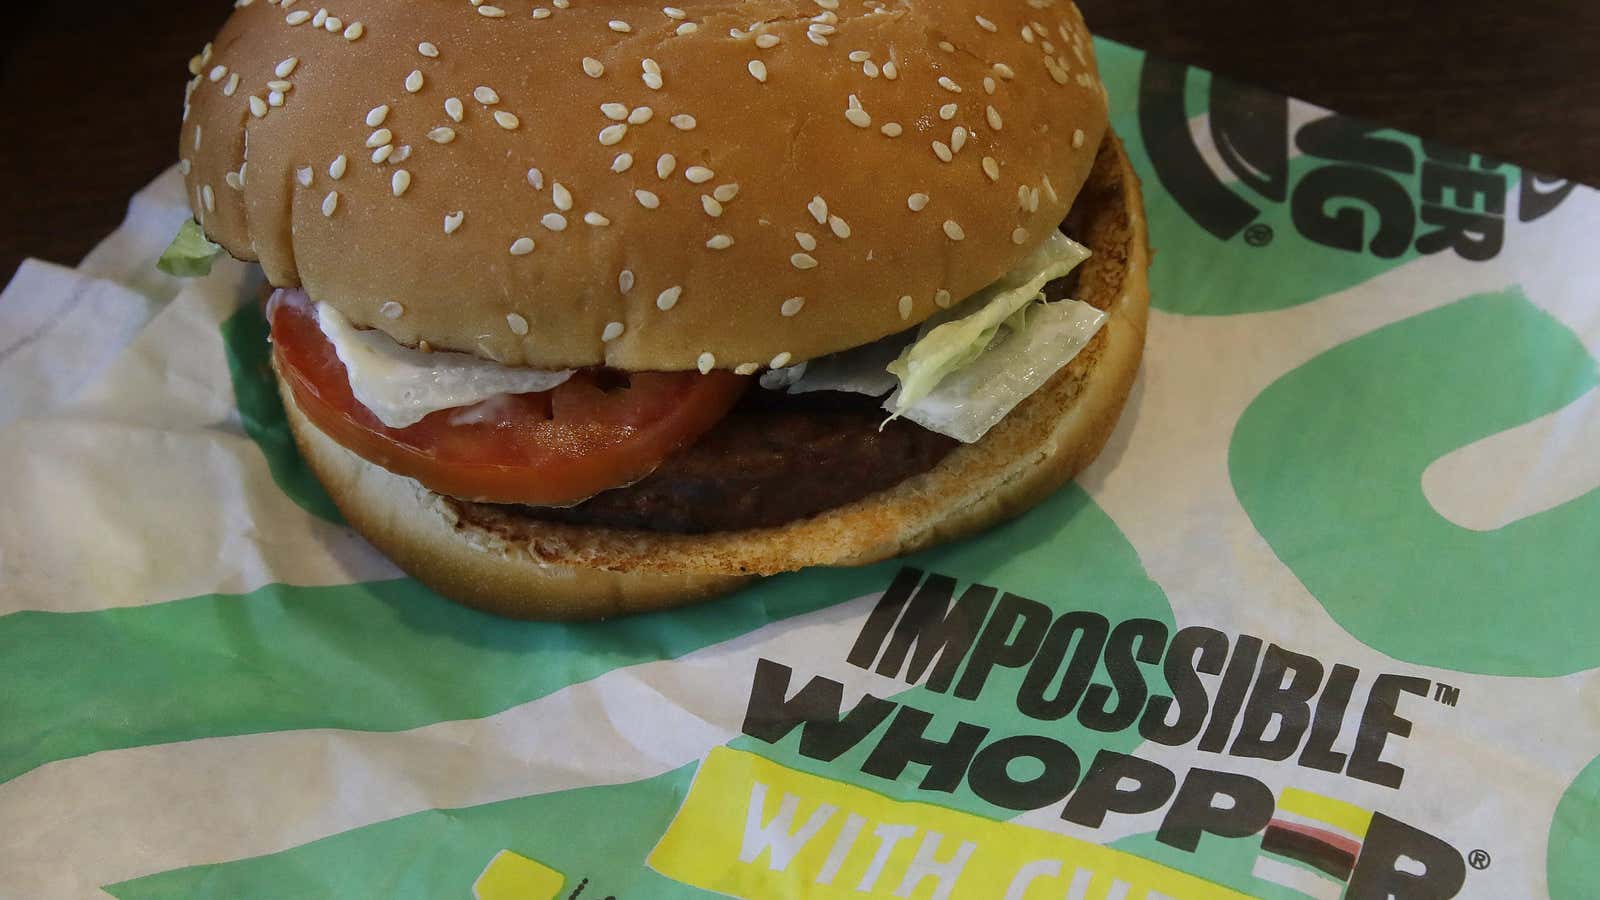 The plant-based Impossible Burger is now on menu boards at Burger King.